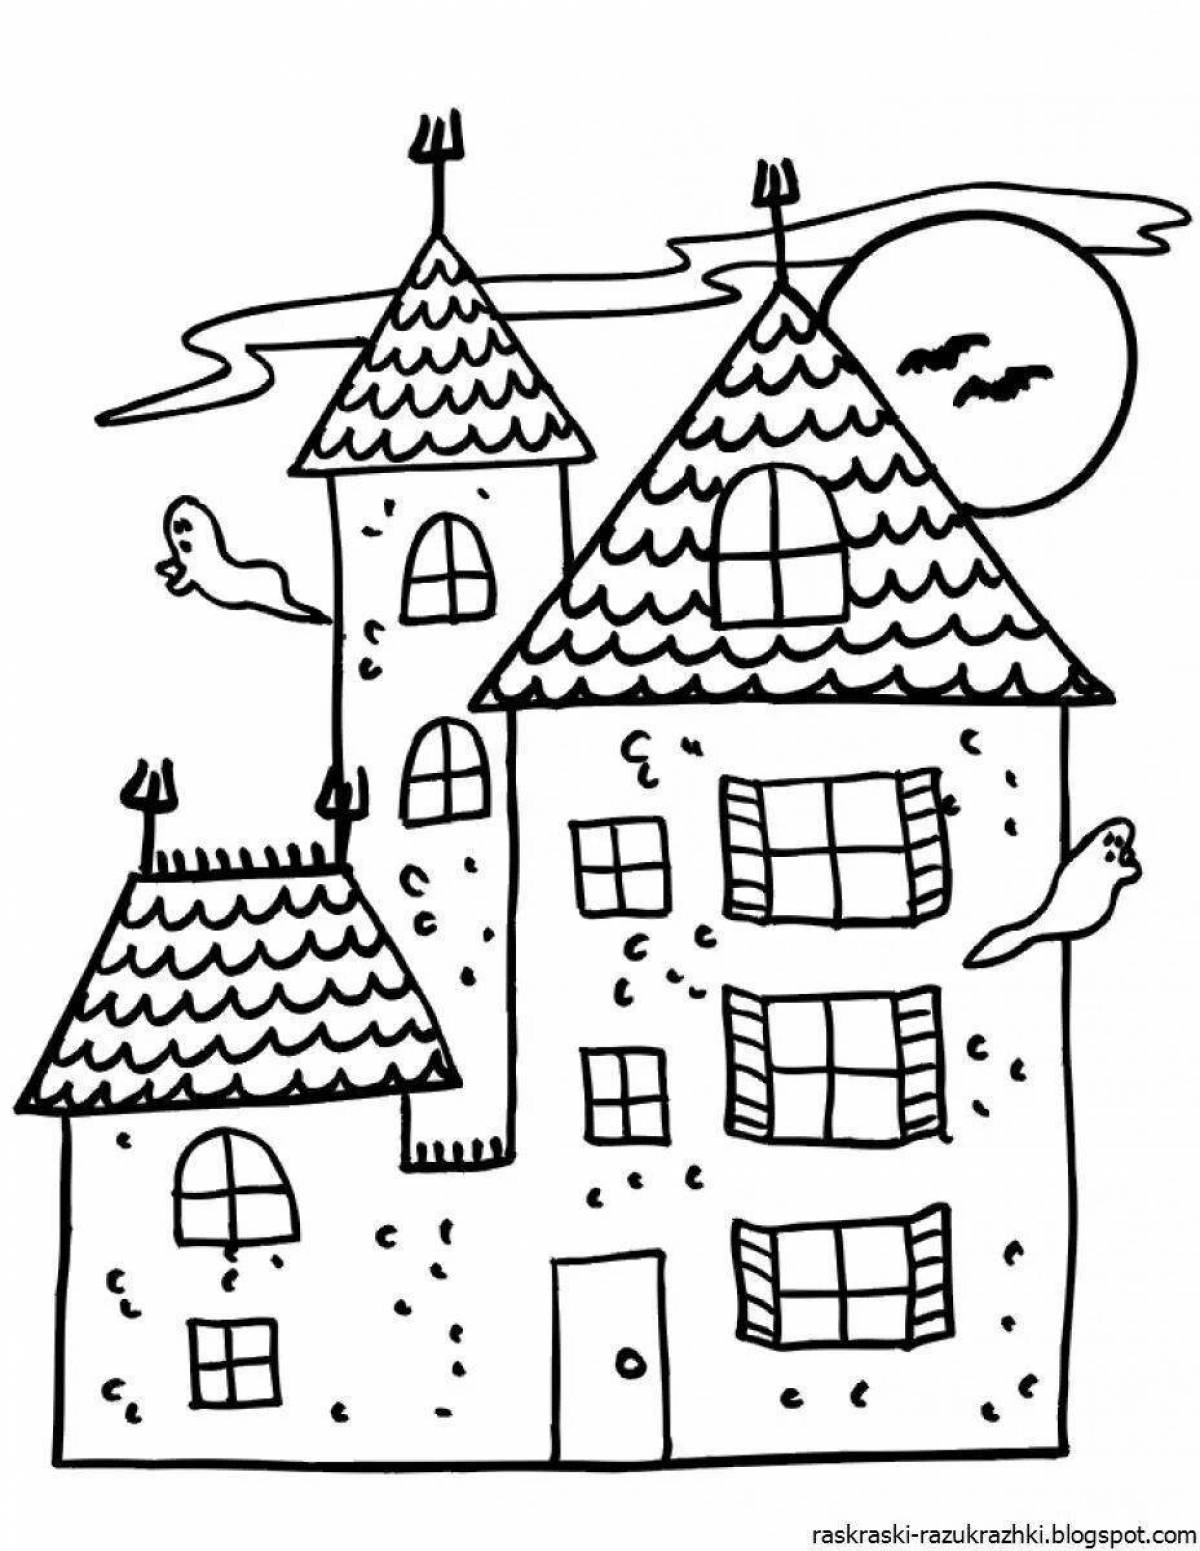 Fun house coloring pages for kids